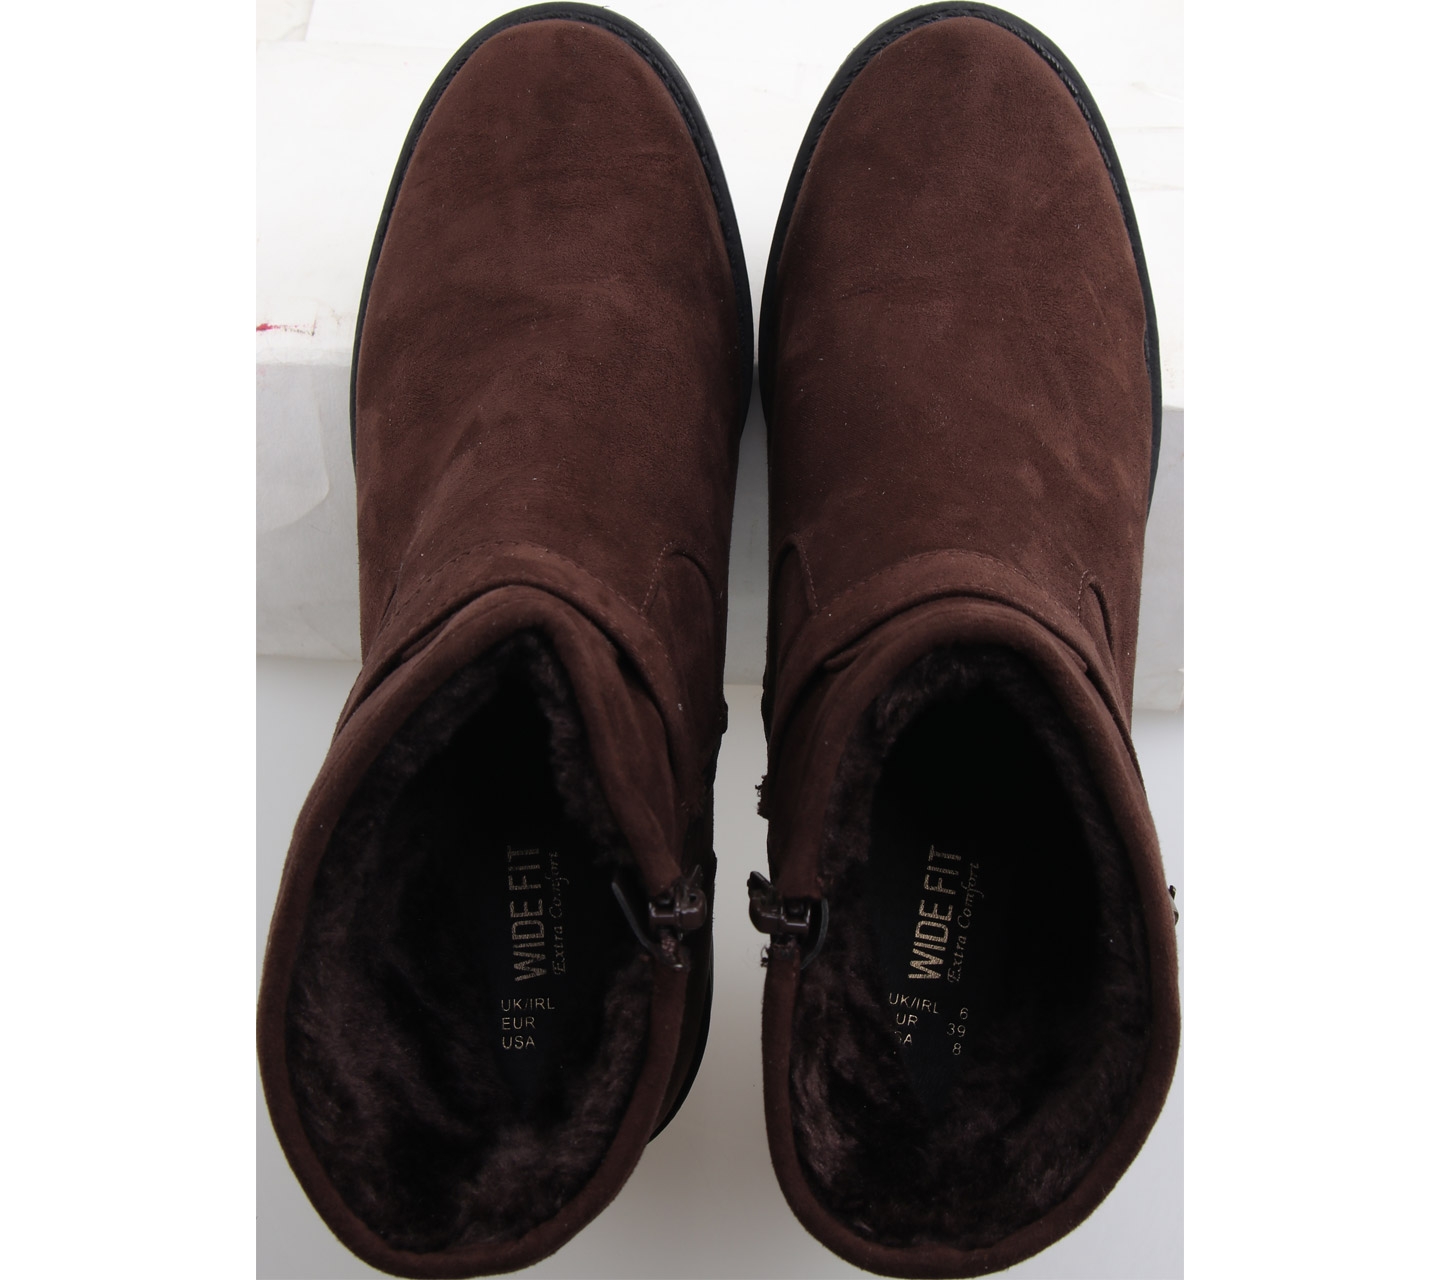 Wide Fit Brown fur Boots